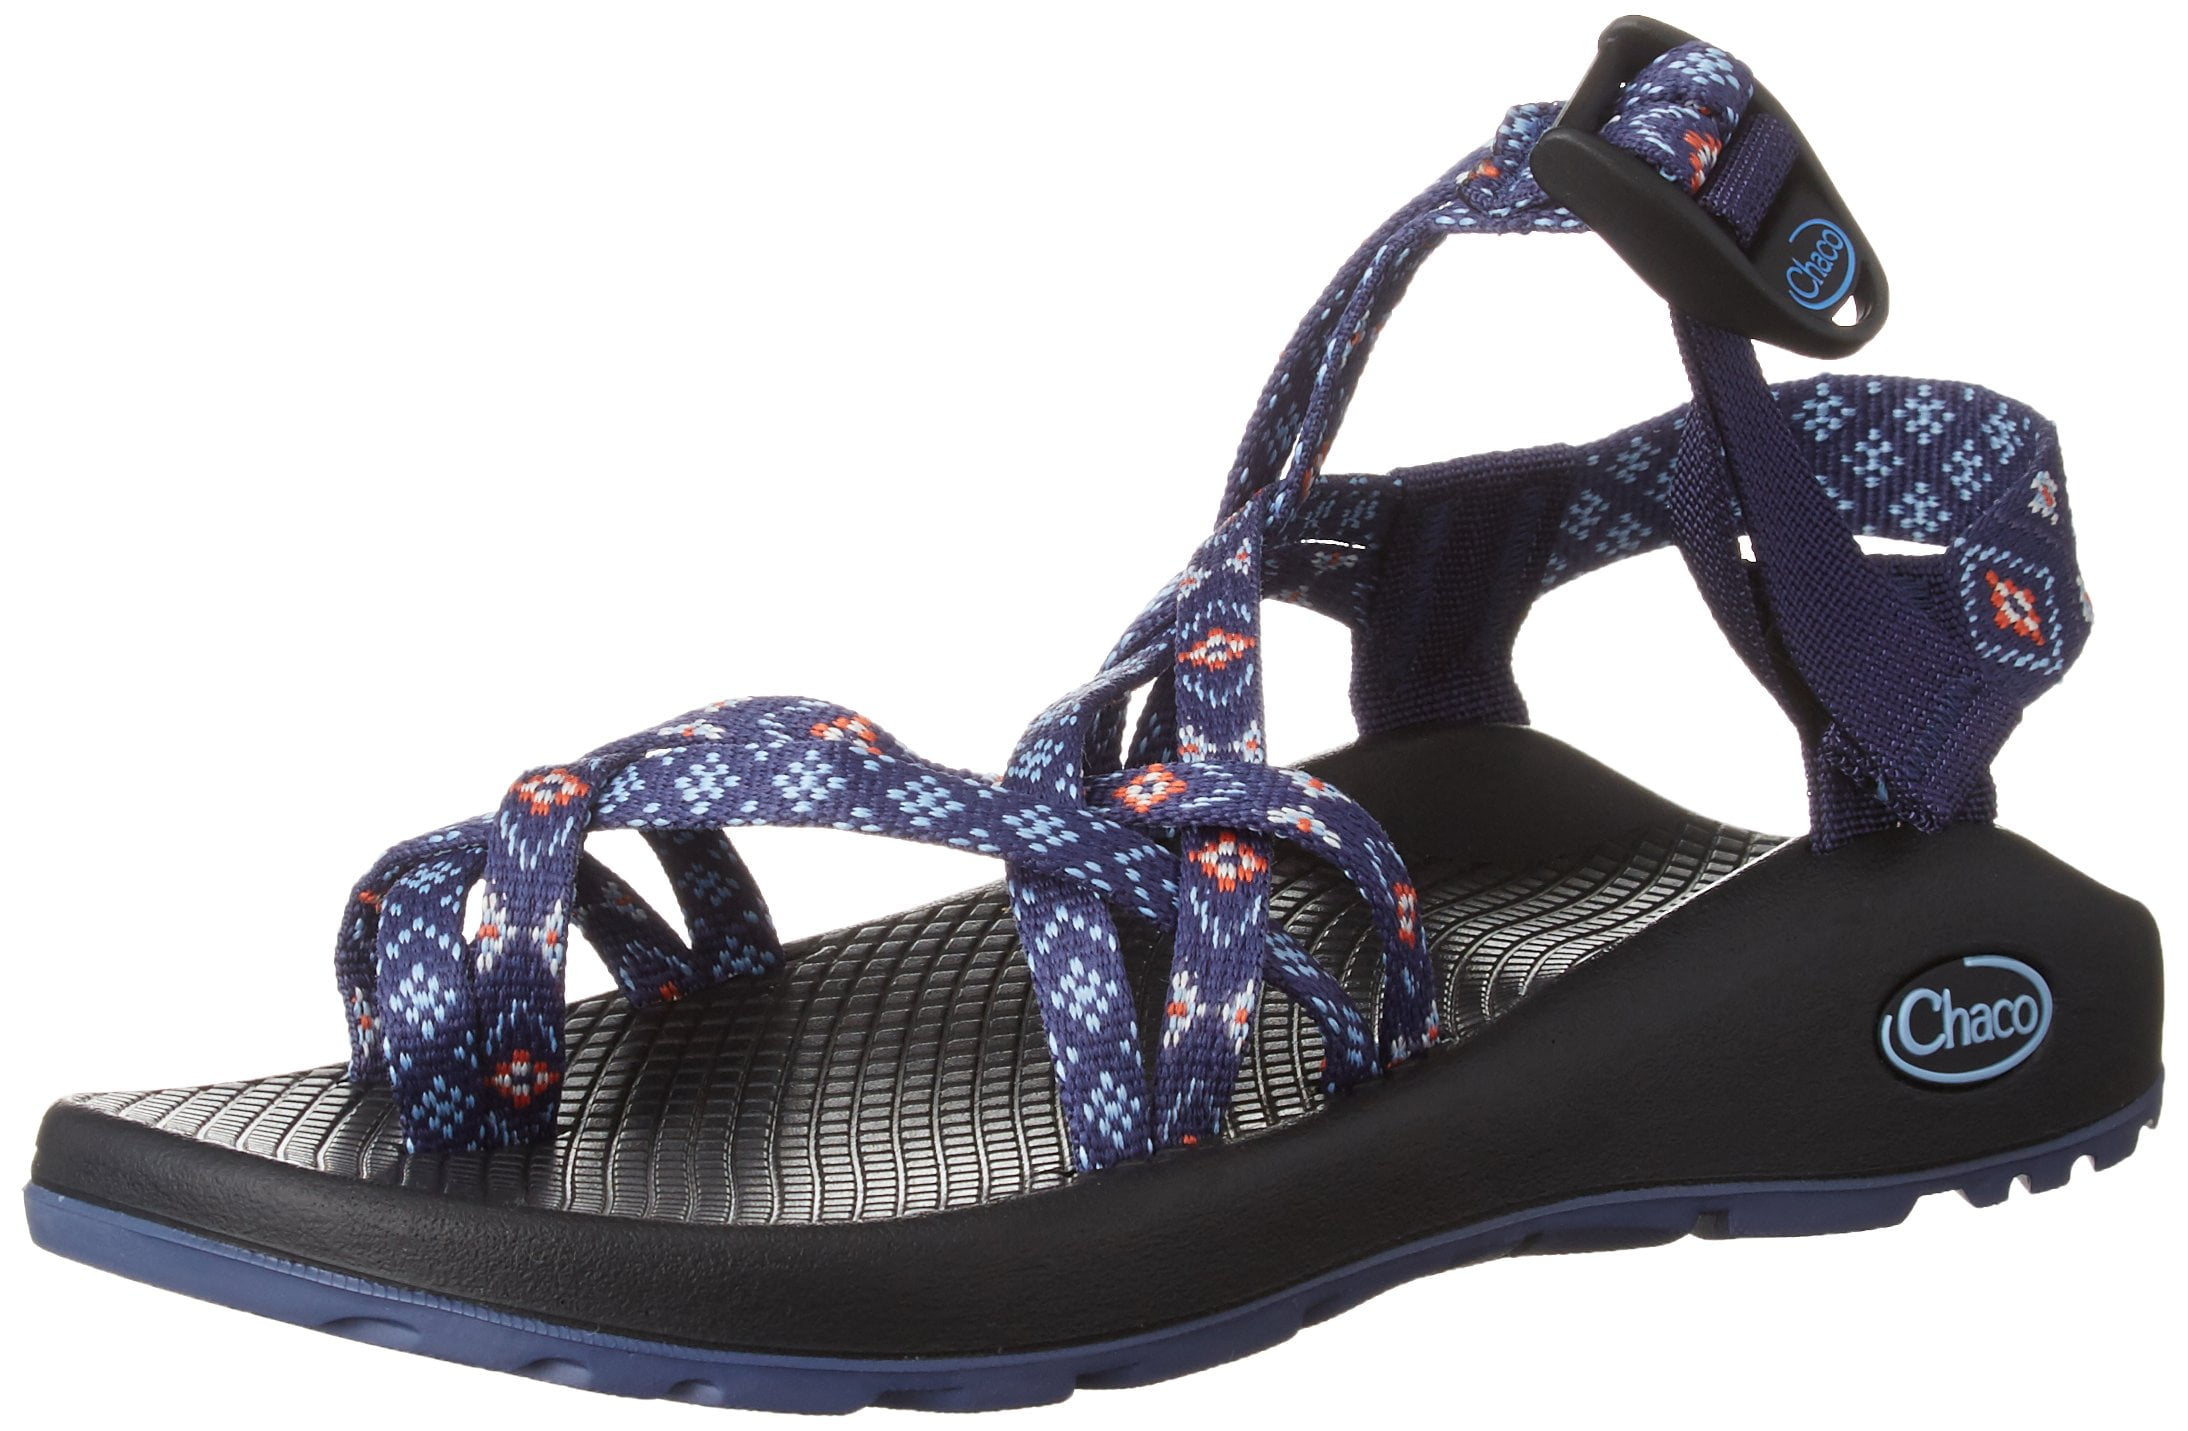 chaco athletic sandals